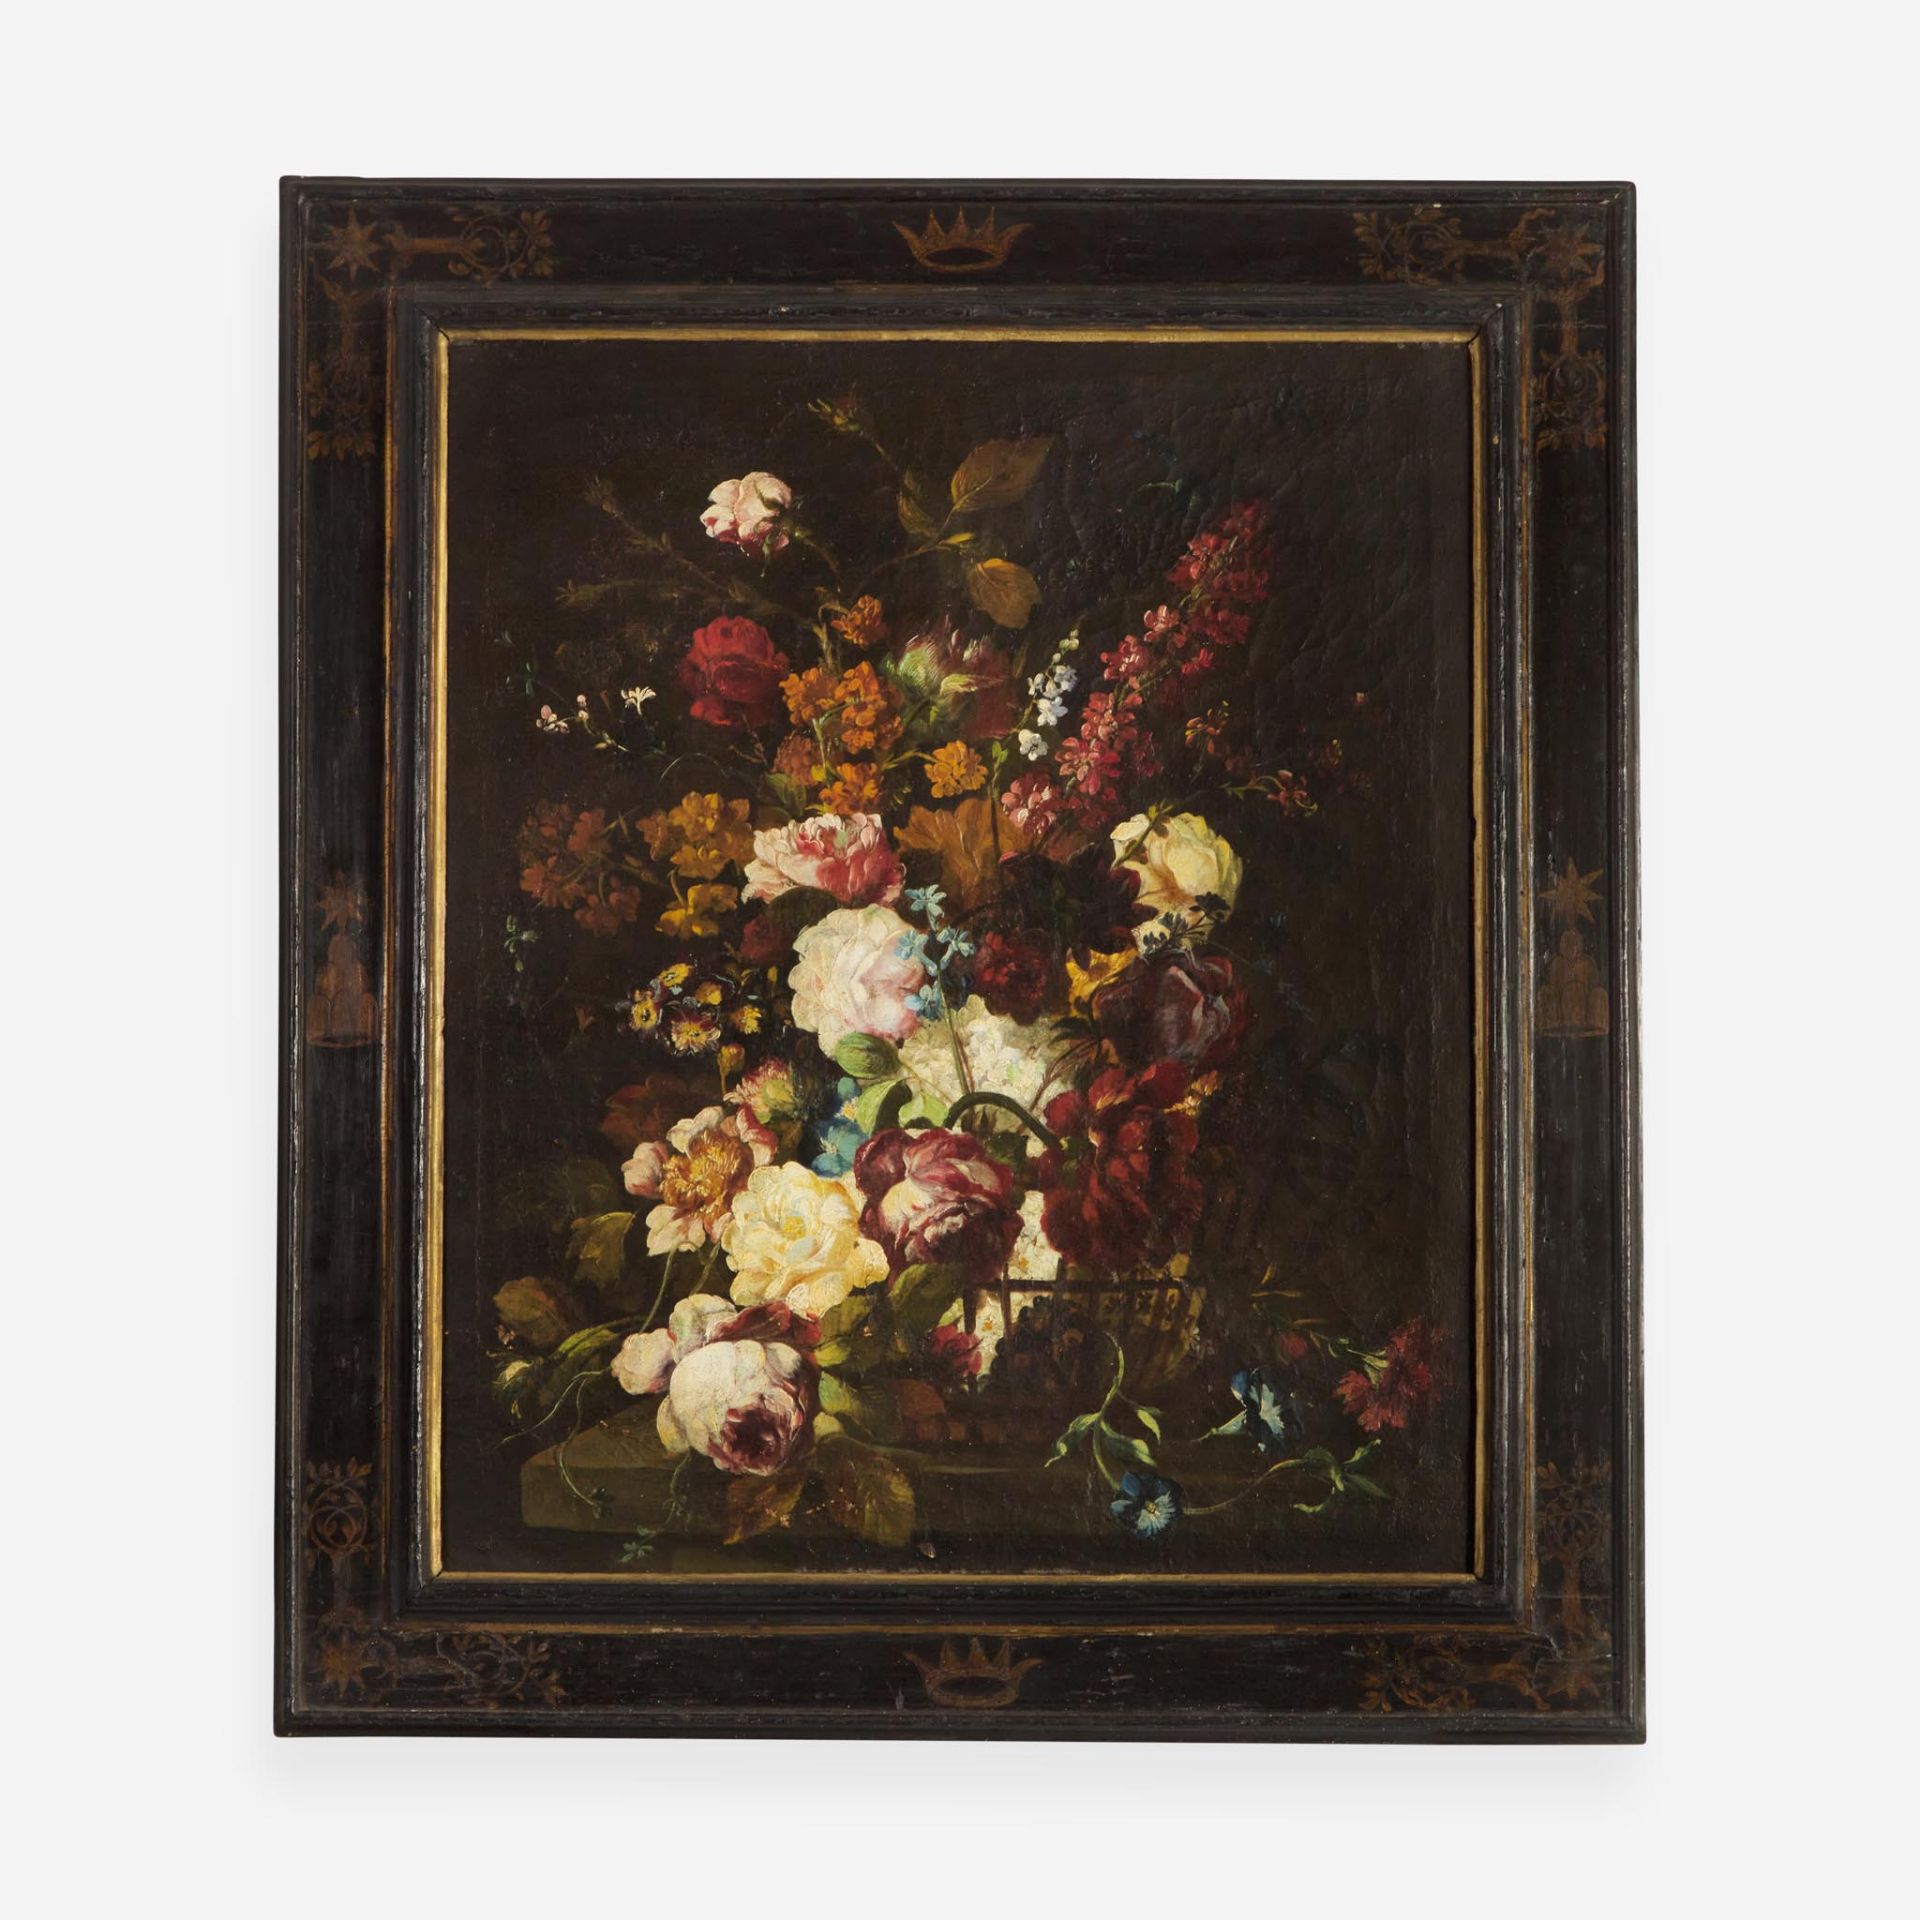 Italian School (17th Century) Floral Still Life in a Basket; together with a Companion (A Pair) - Image 3 of 5